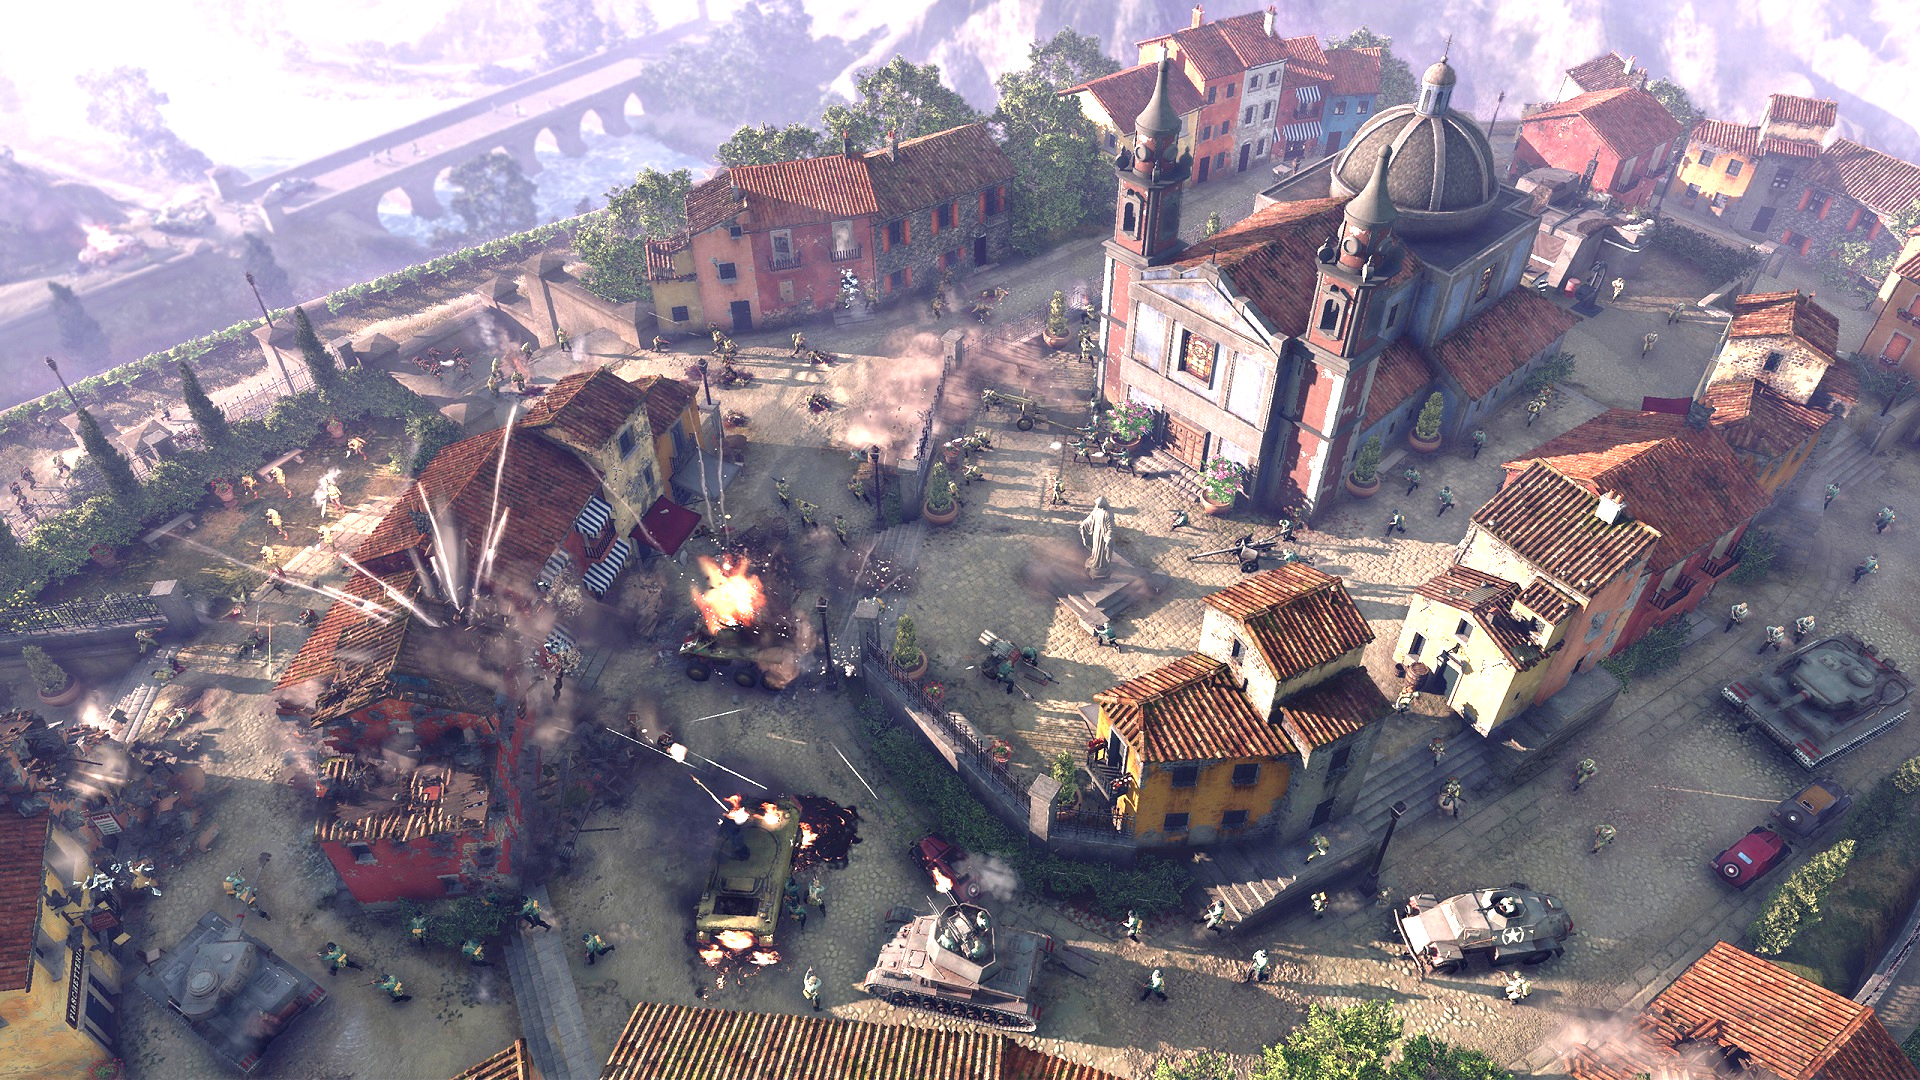 Can’t get into the Company of Heroes 3 pre-alpha? Here’s the RTS layer in action